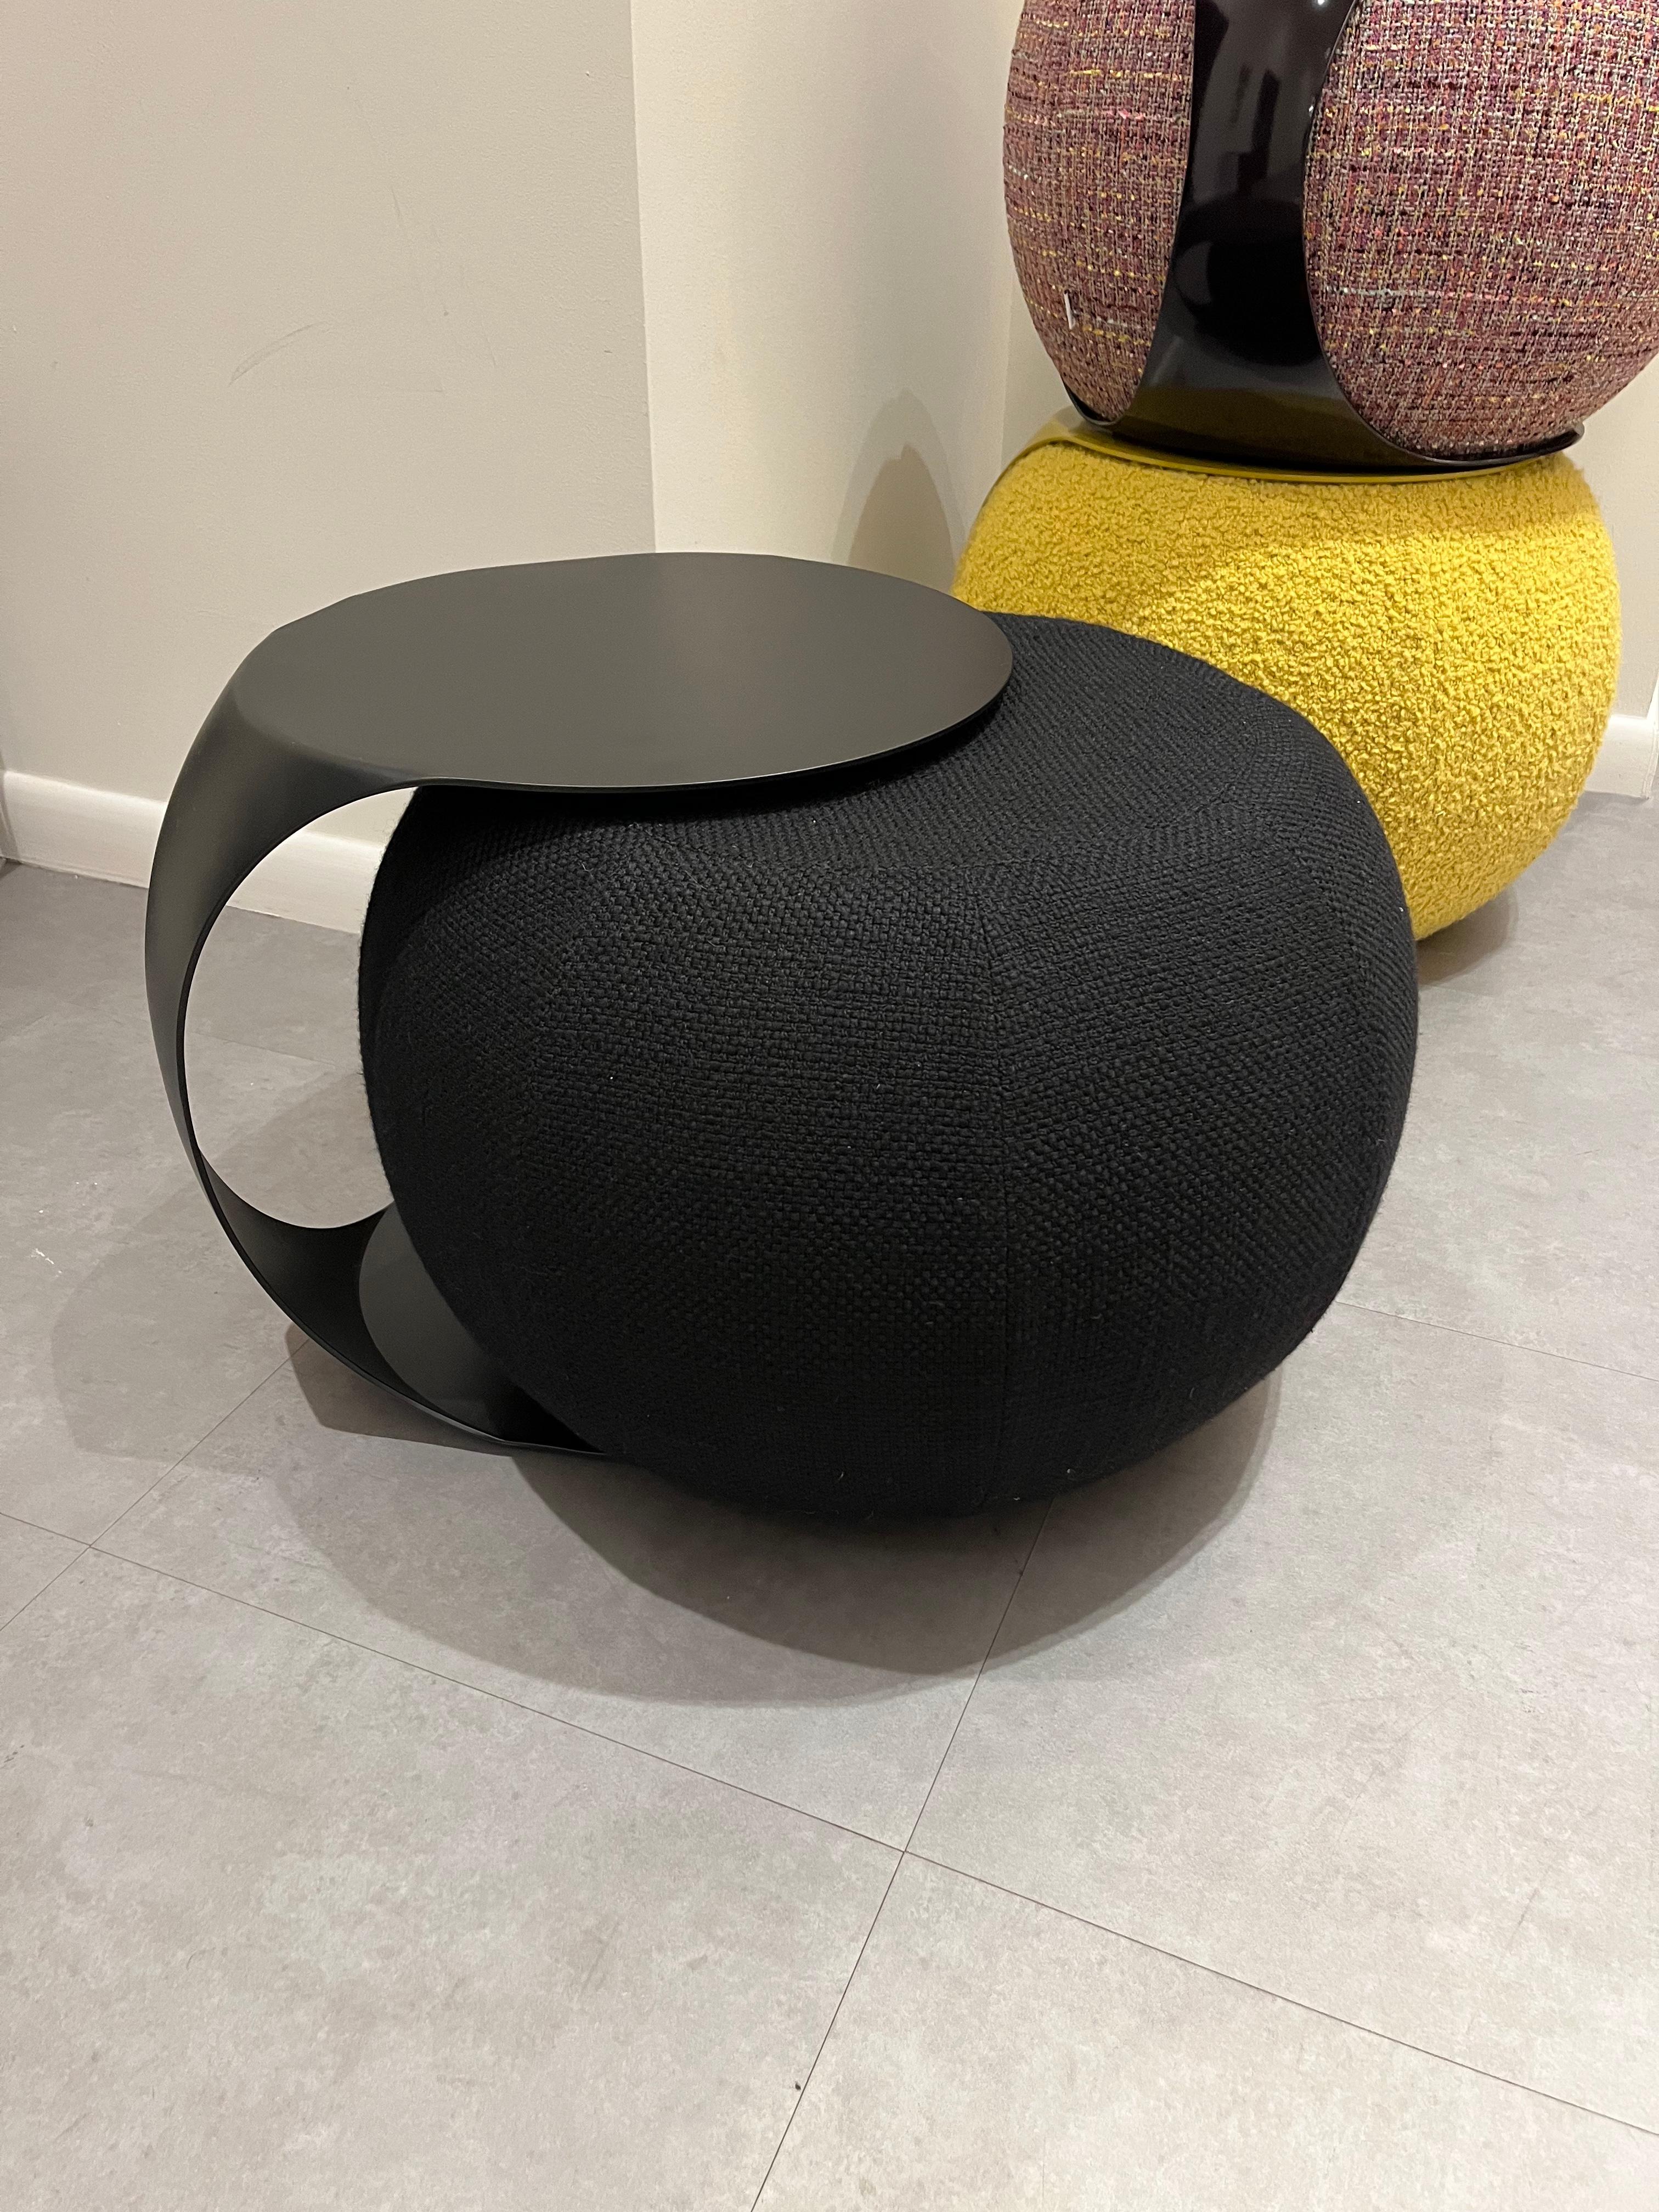 A side table WITH A TRICK UP ITS SLEEVE. WHEN ADDITIONAL SEATING OR A FOOTSTOOL IS NEEDED, THE TEXTURAL POUF SLIPS OUT FROM ITS SLEEK METAL BASE.
17